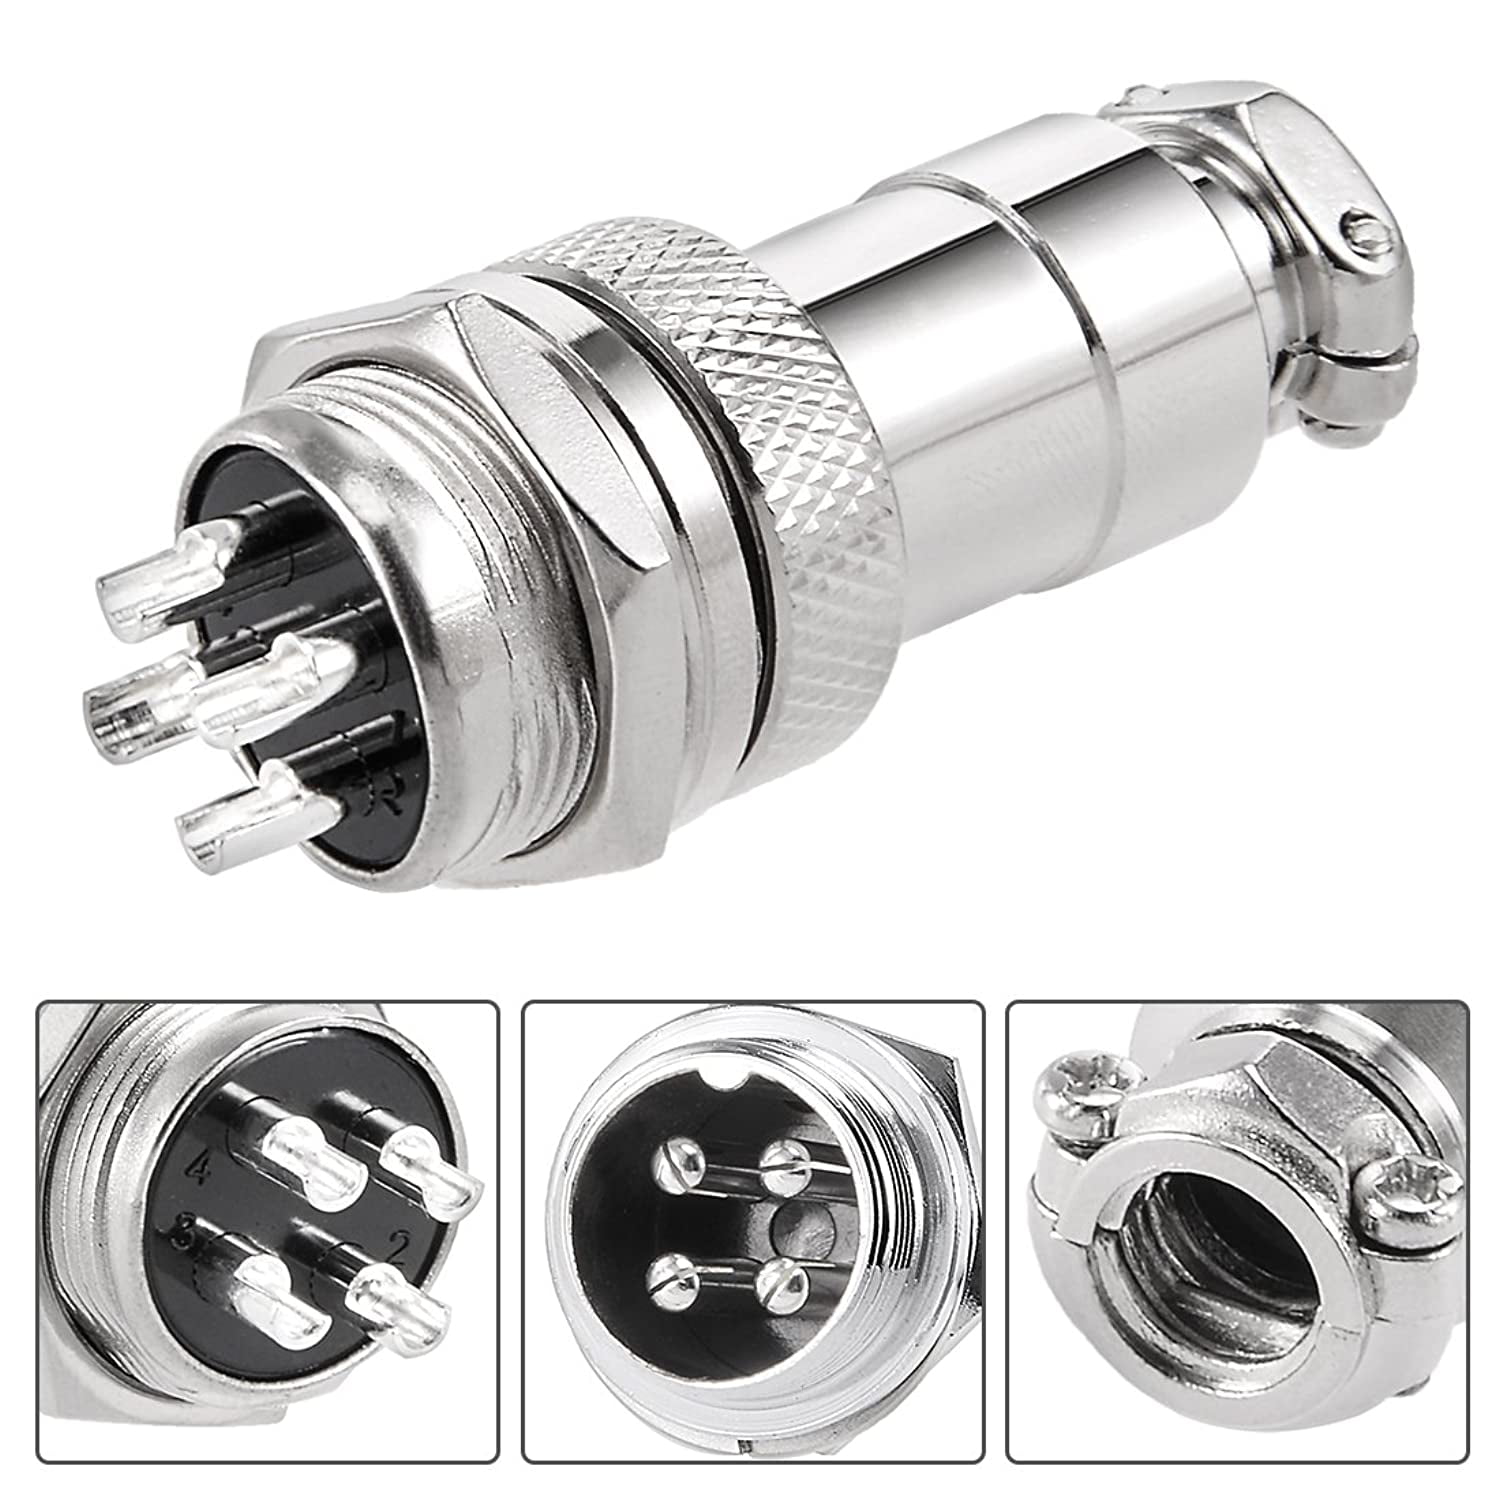 Details about   5x Aviation Plug Male & Female Wire Panel Metal Connector 16mm 4 Pin GX16-4  &ZZ